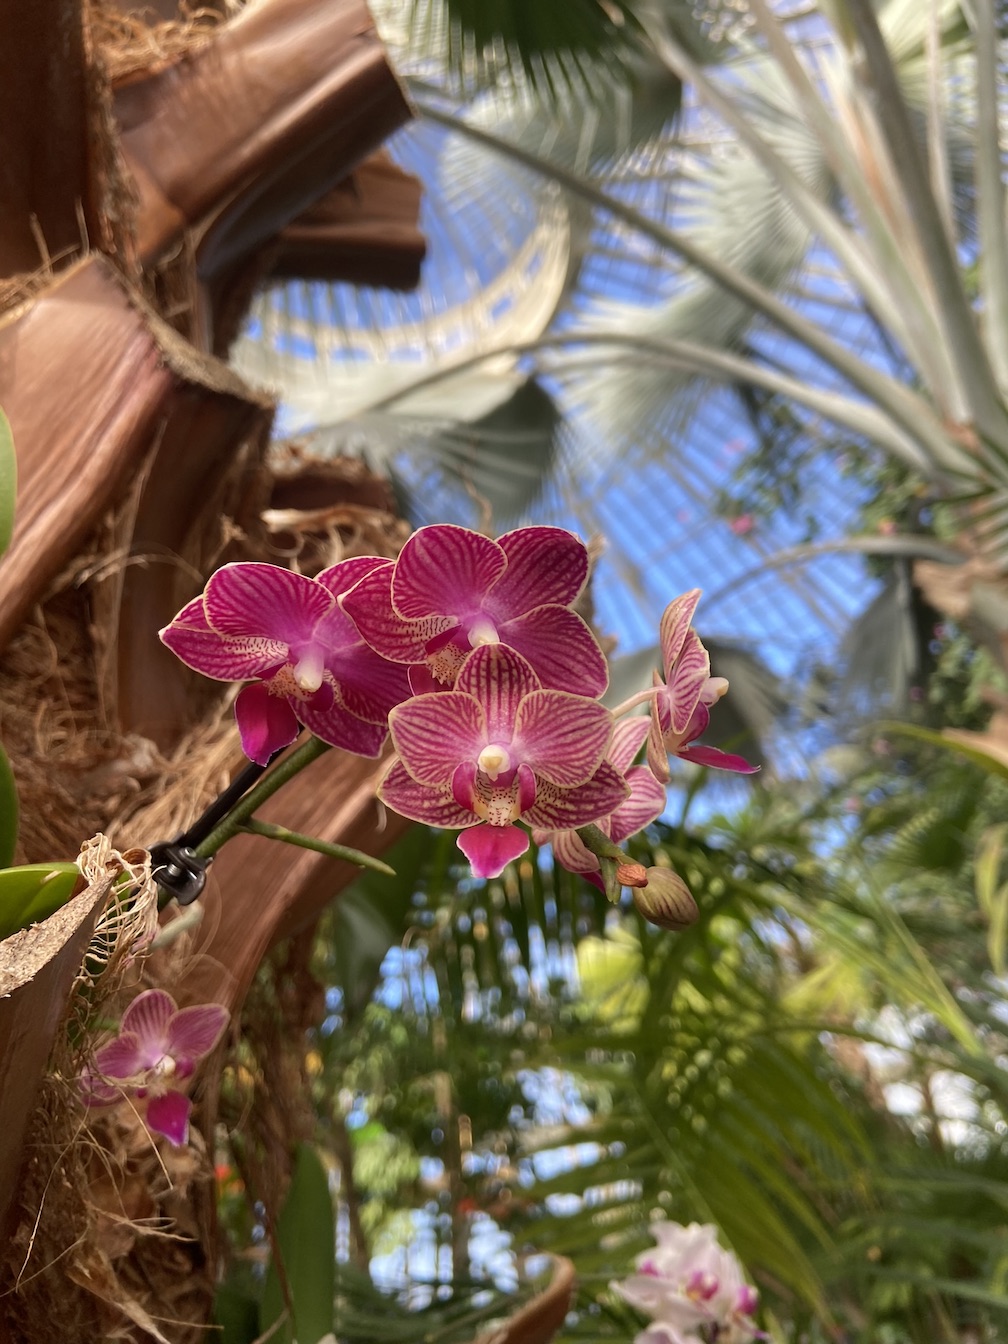 Images courtesy of the Buffalo and Erie County Botanical Gardens